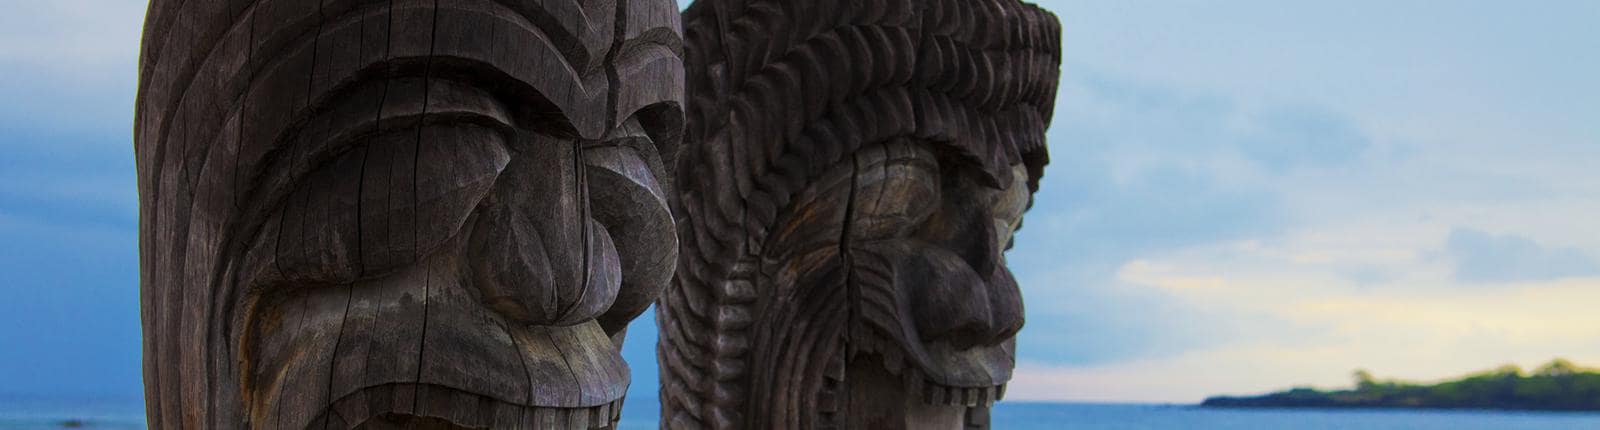 Close-up view of historical carvings in Honolulu, Hawaii